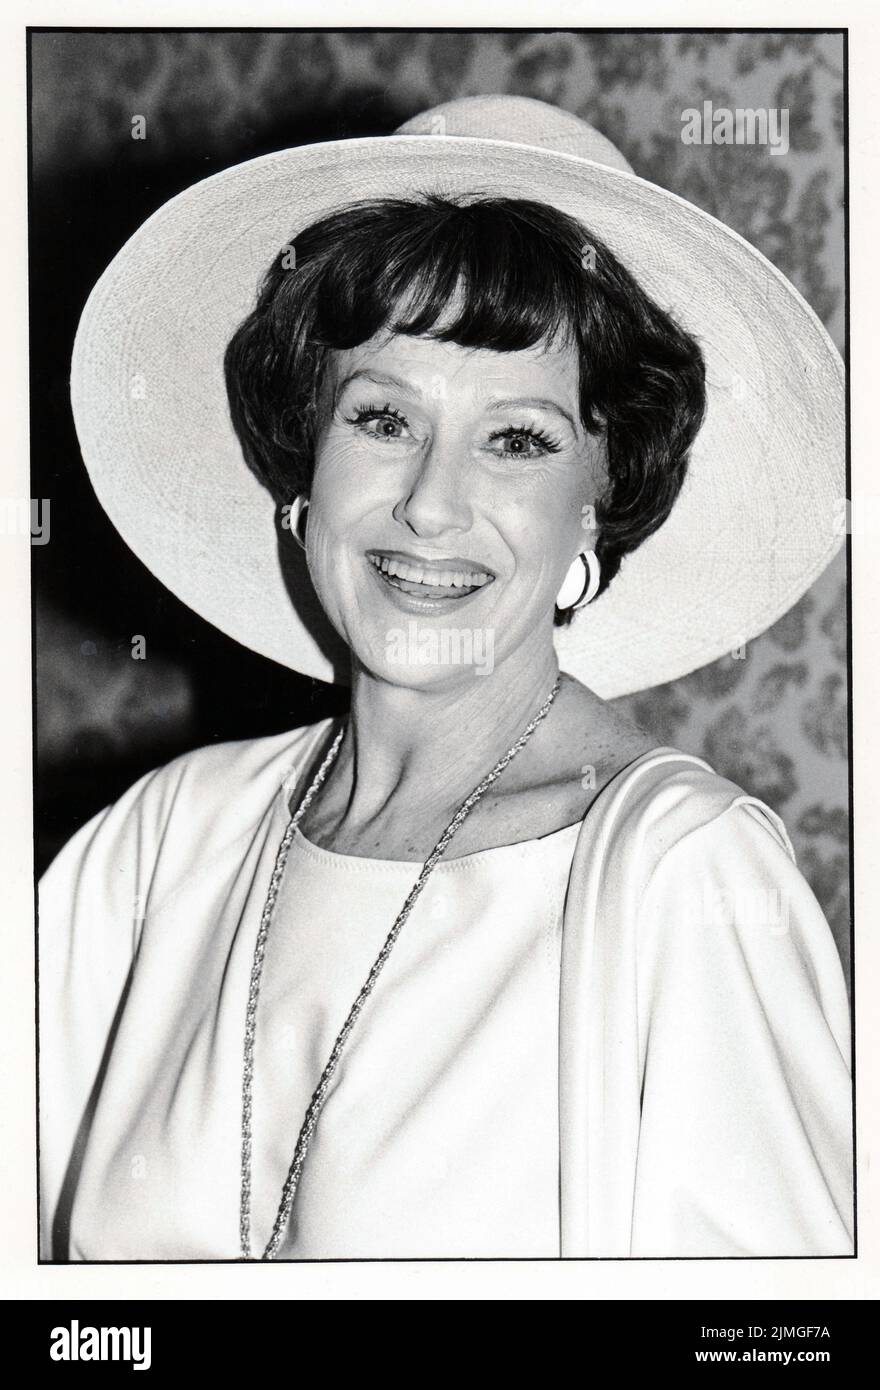 A posed photo of sixty something singer actress Ruth Warrick who, at the time, played Phoebe Tyler Wallingford on All My Children. She played the role from 1970 until her death in 2005. Photo circa 1980. Stock Photo